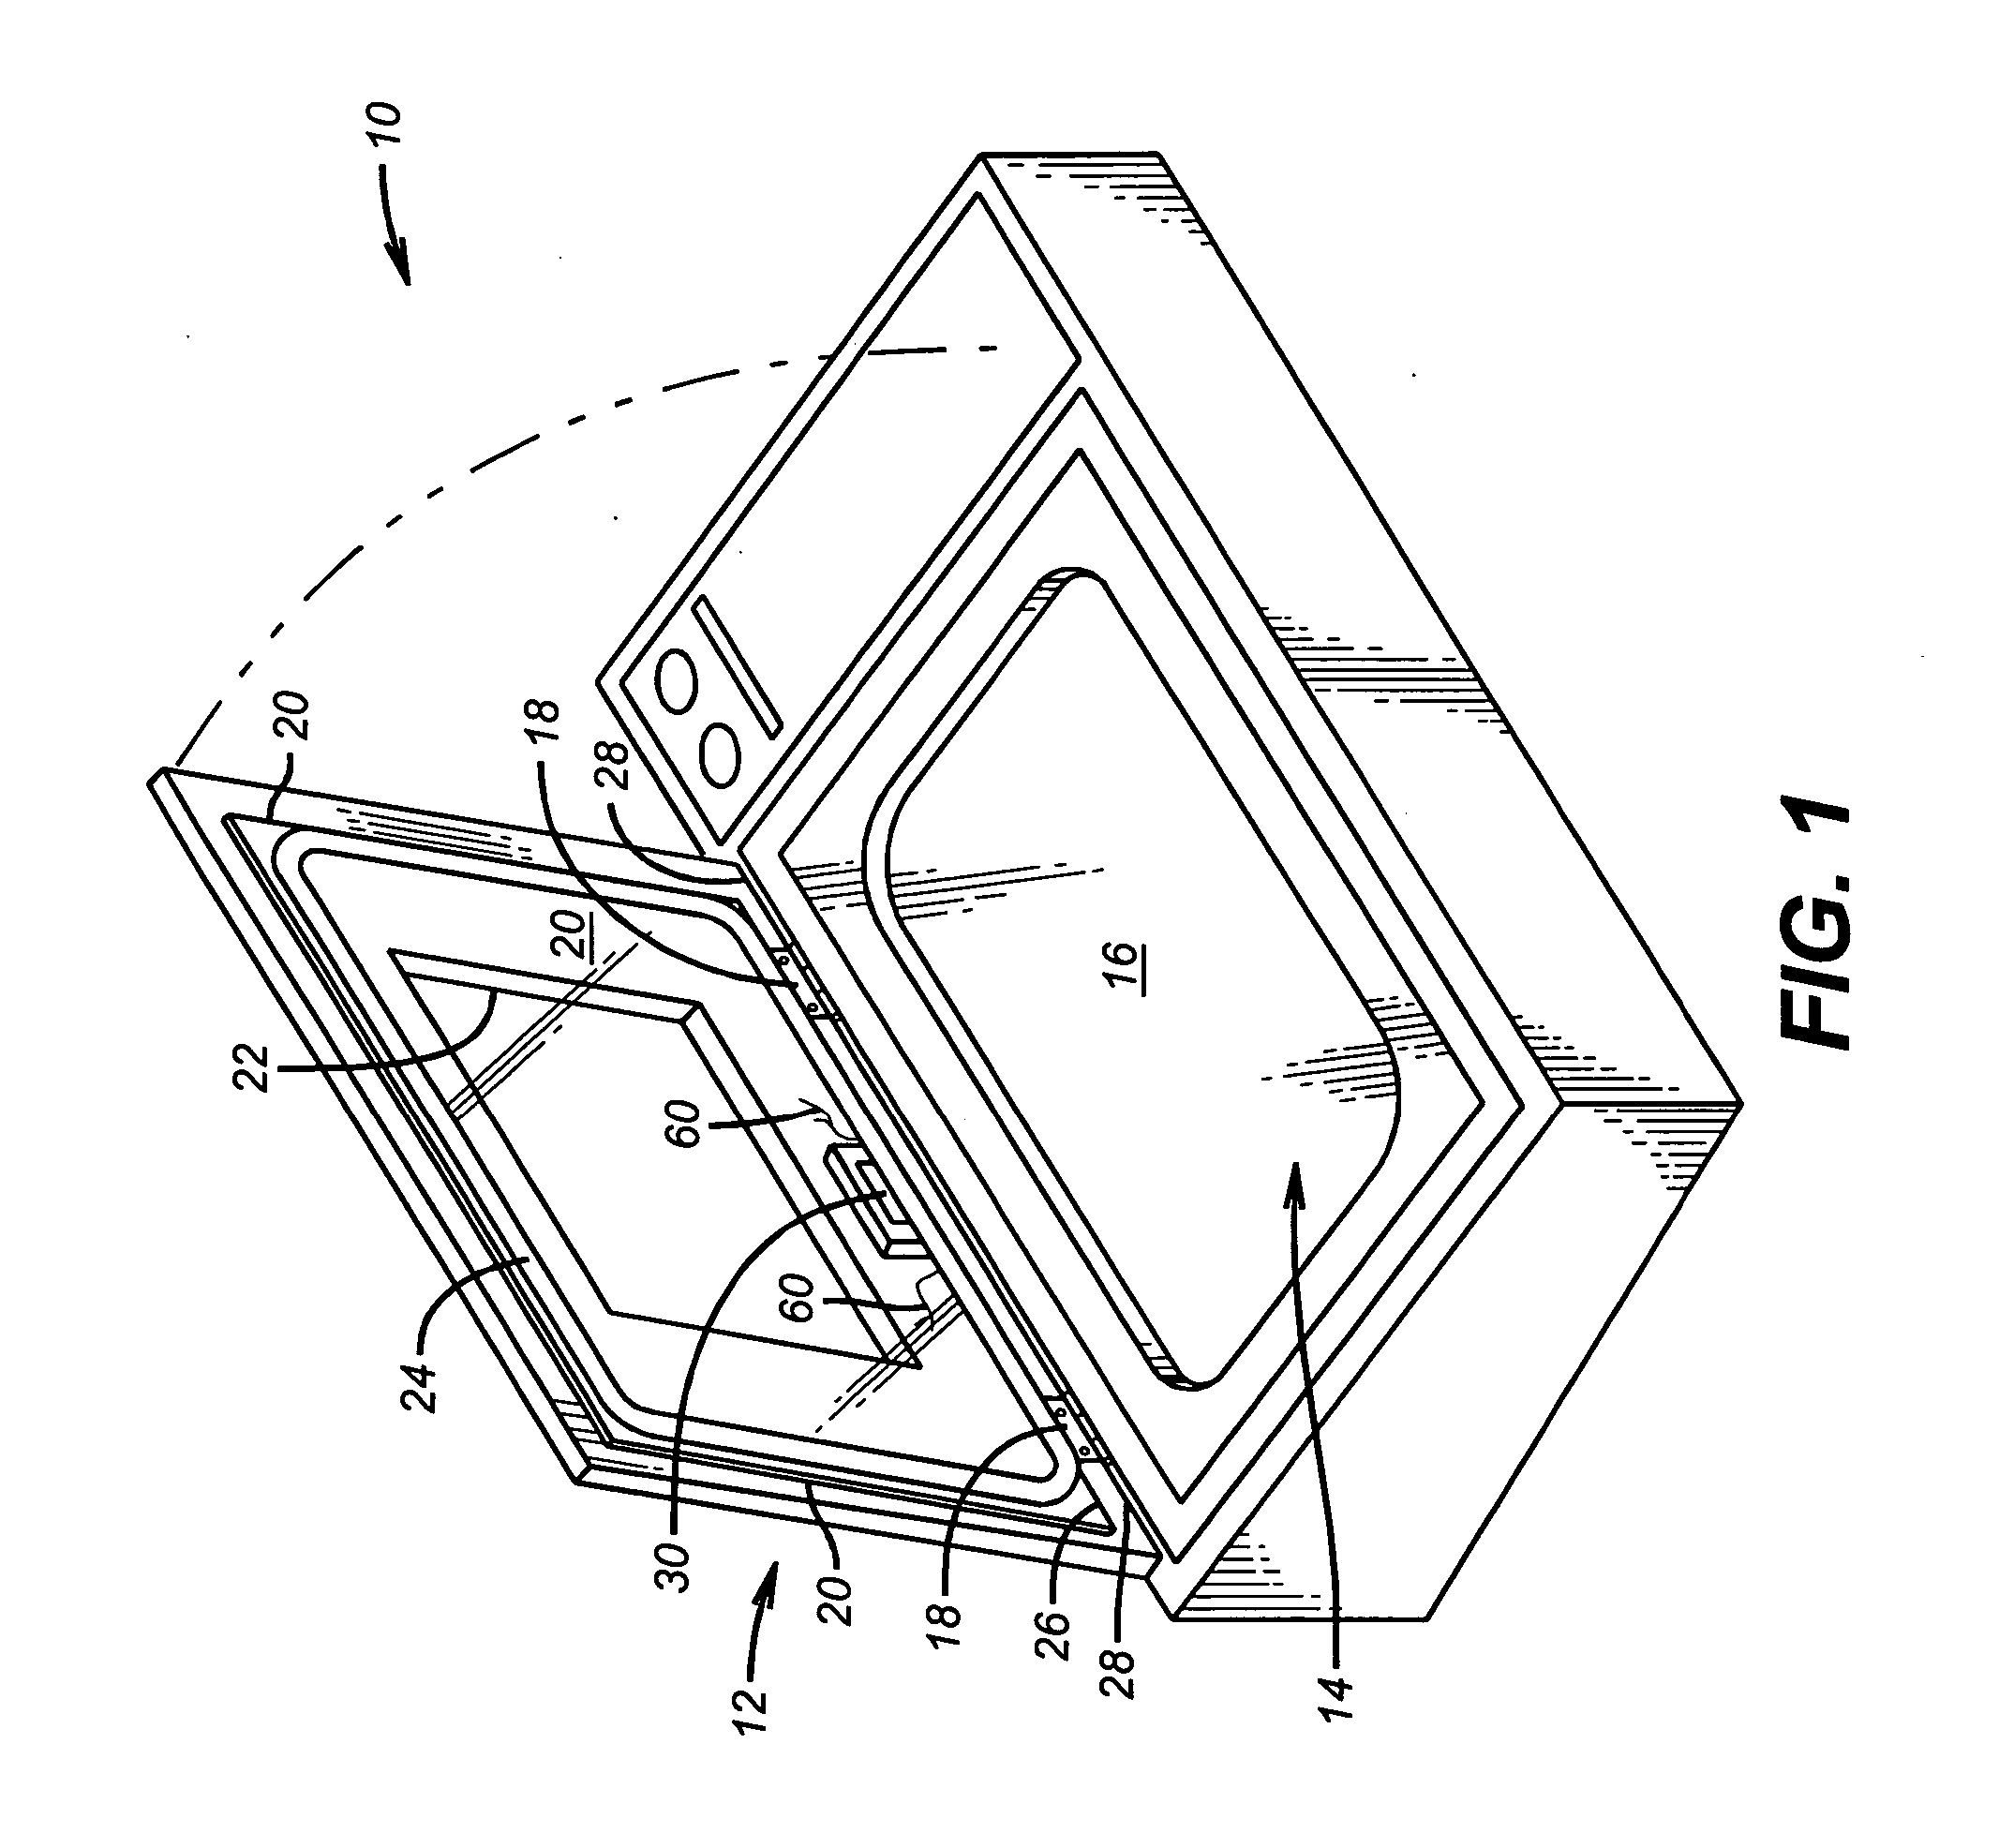 Durable fill block for flow of fluids through a hinged lid